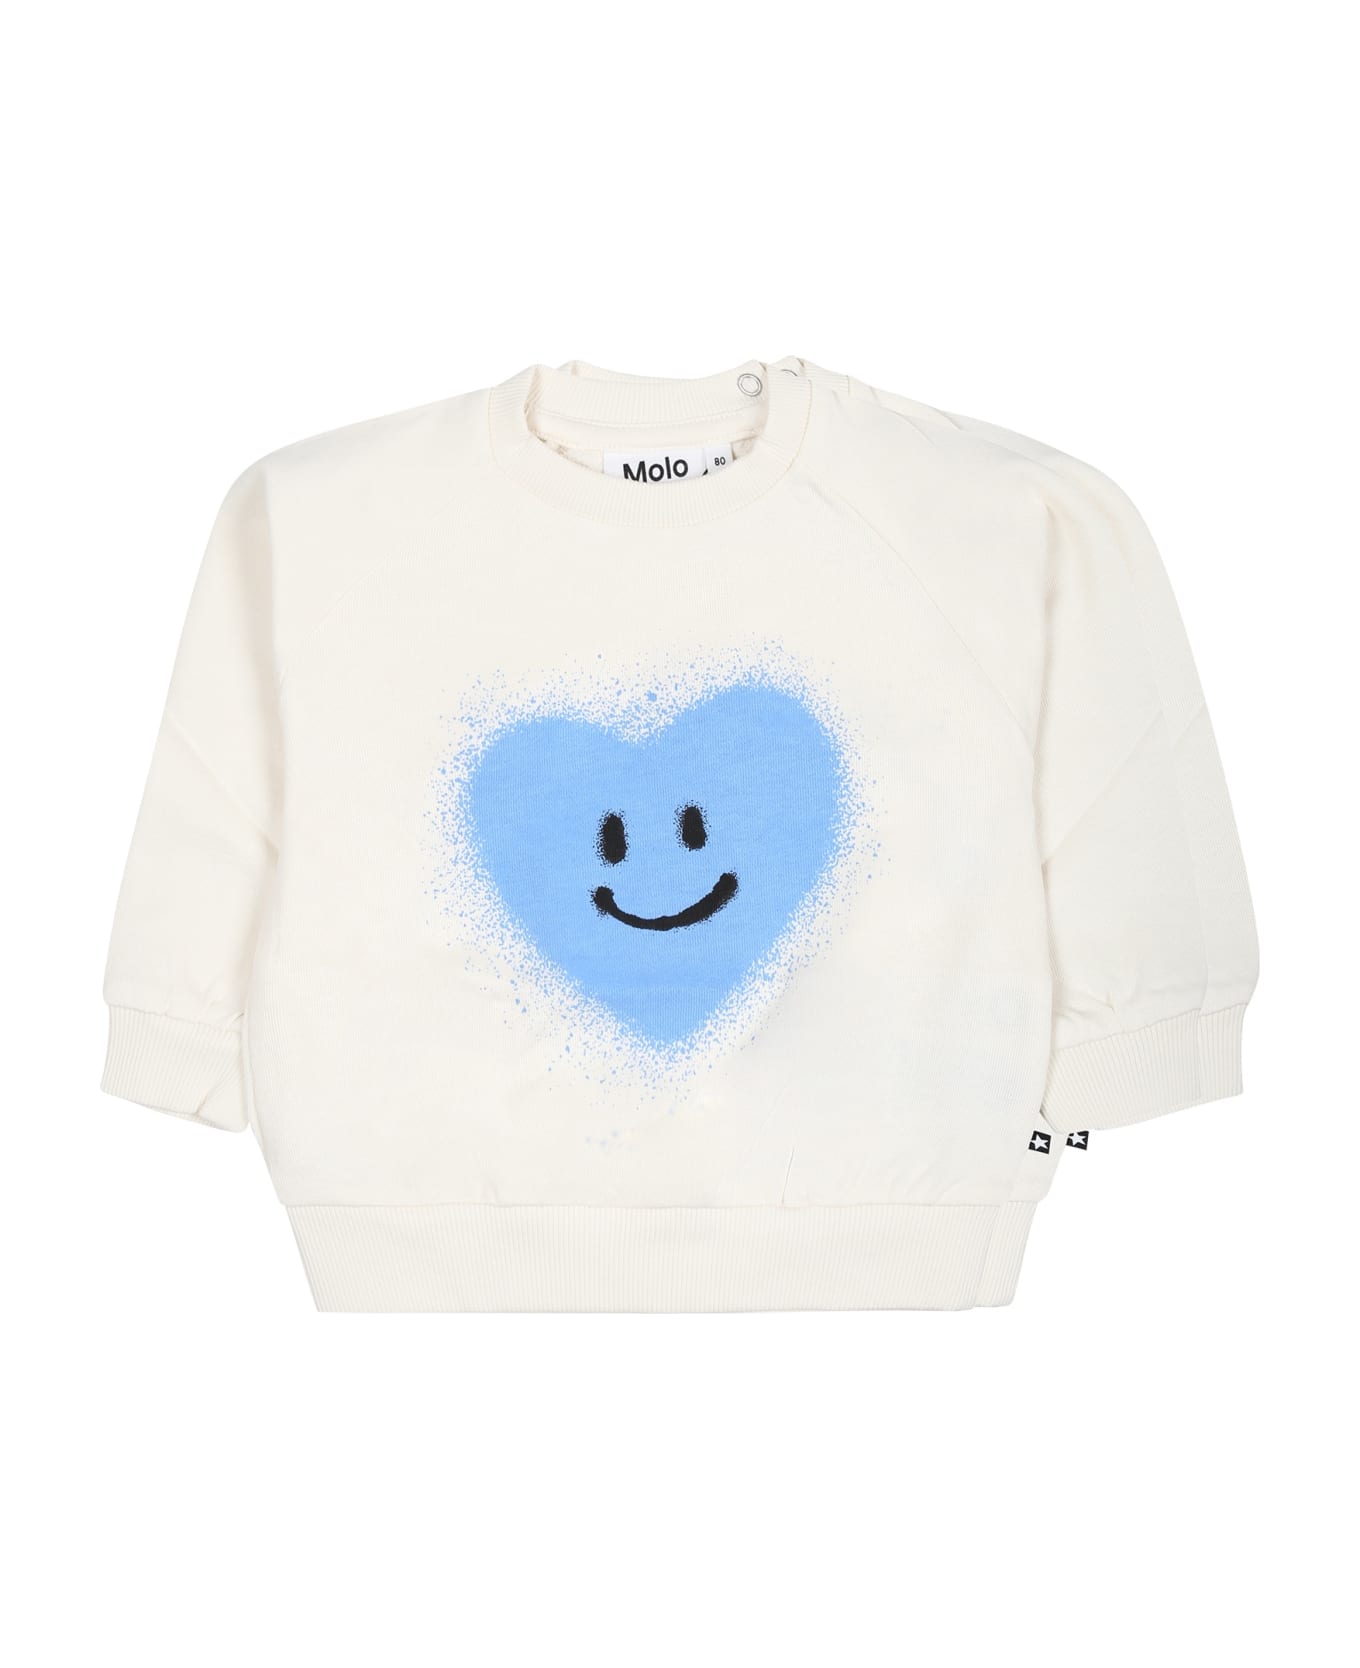 Molo White Sweatshirt For Baby Kids With Heart. - White